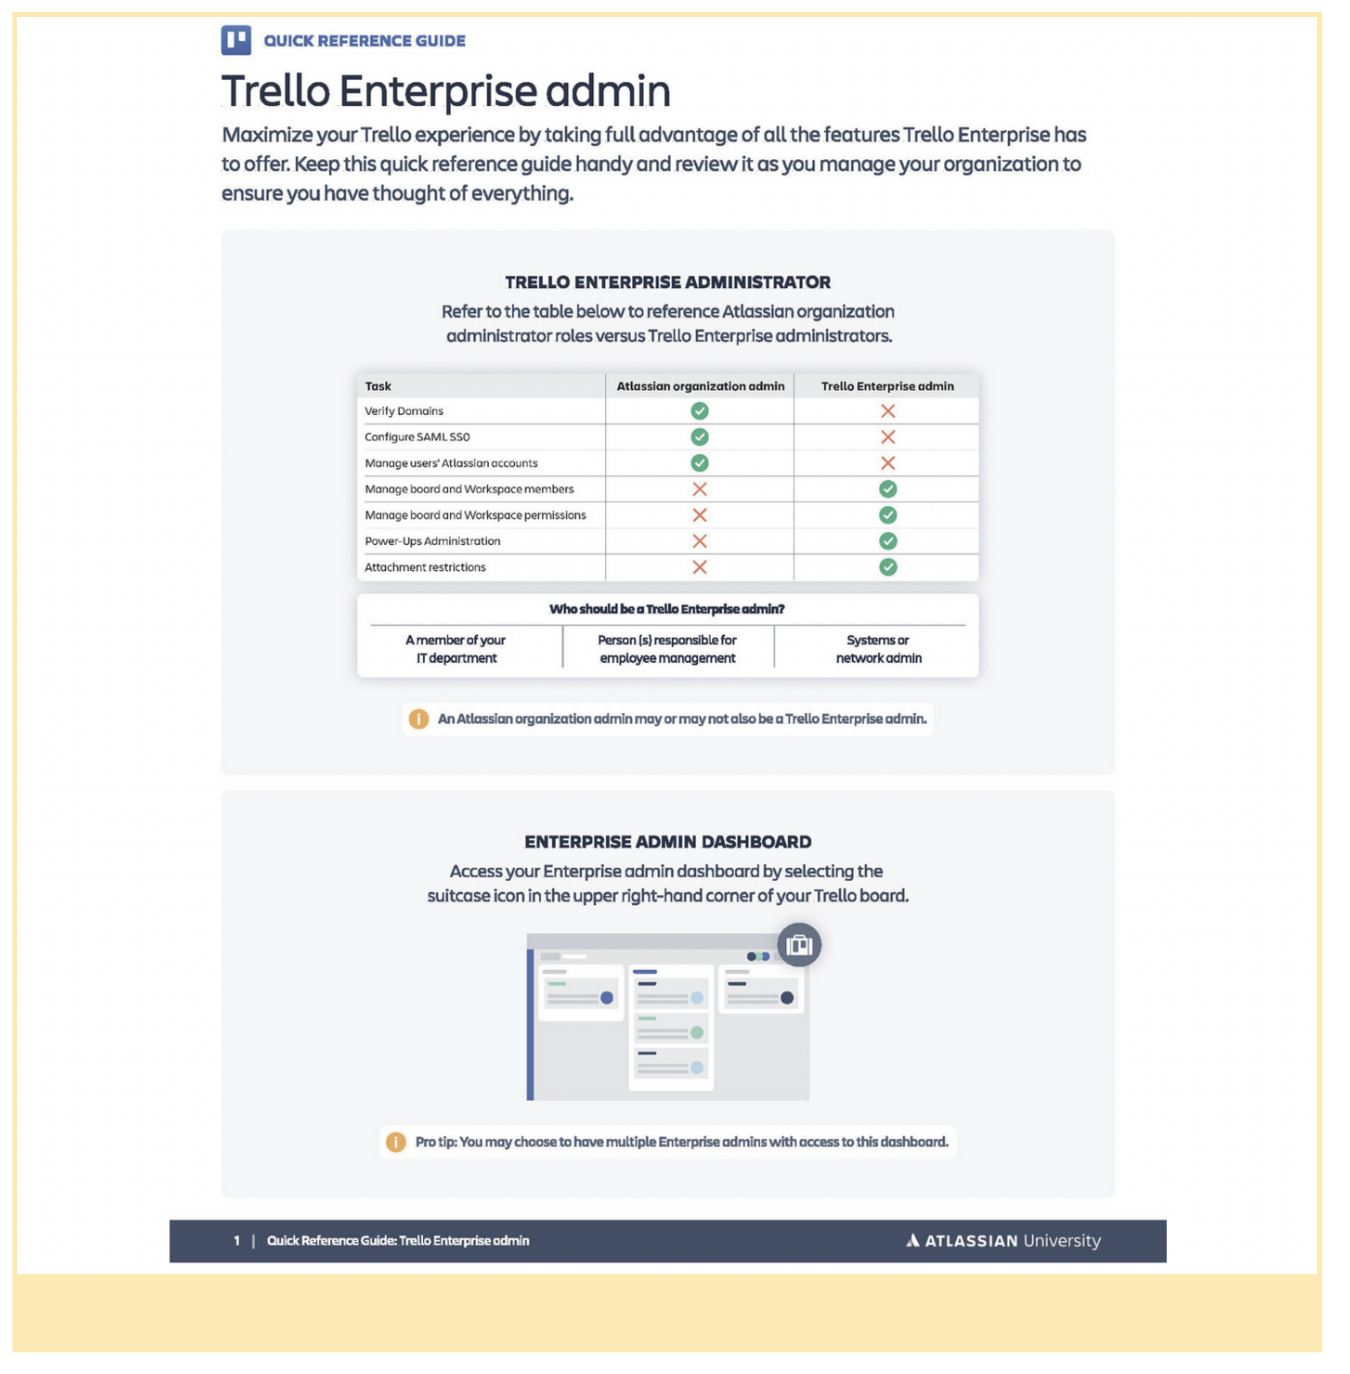 Screenshot of the quick reference guide included with the Trello Enterprise Administration course